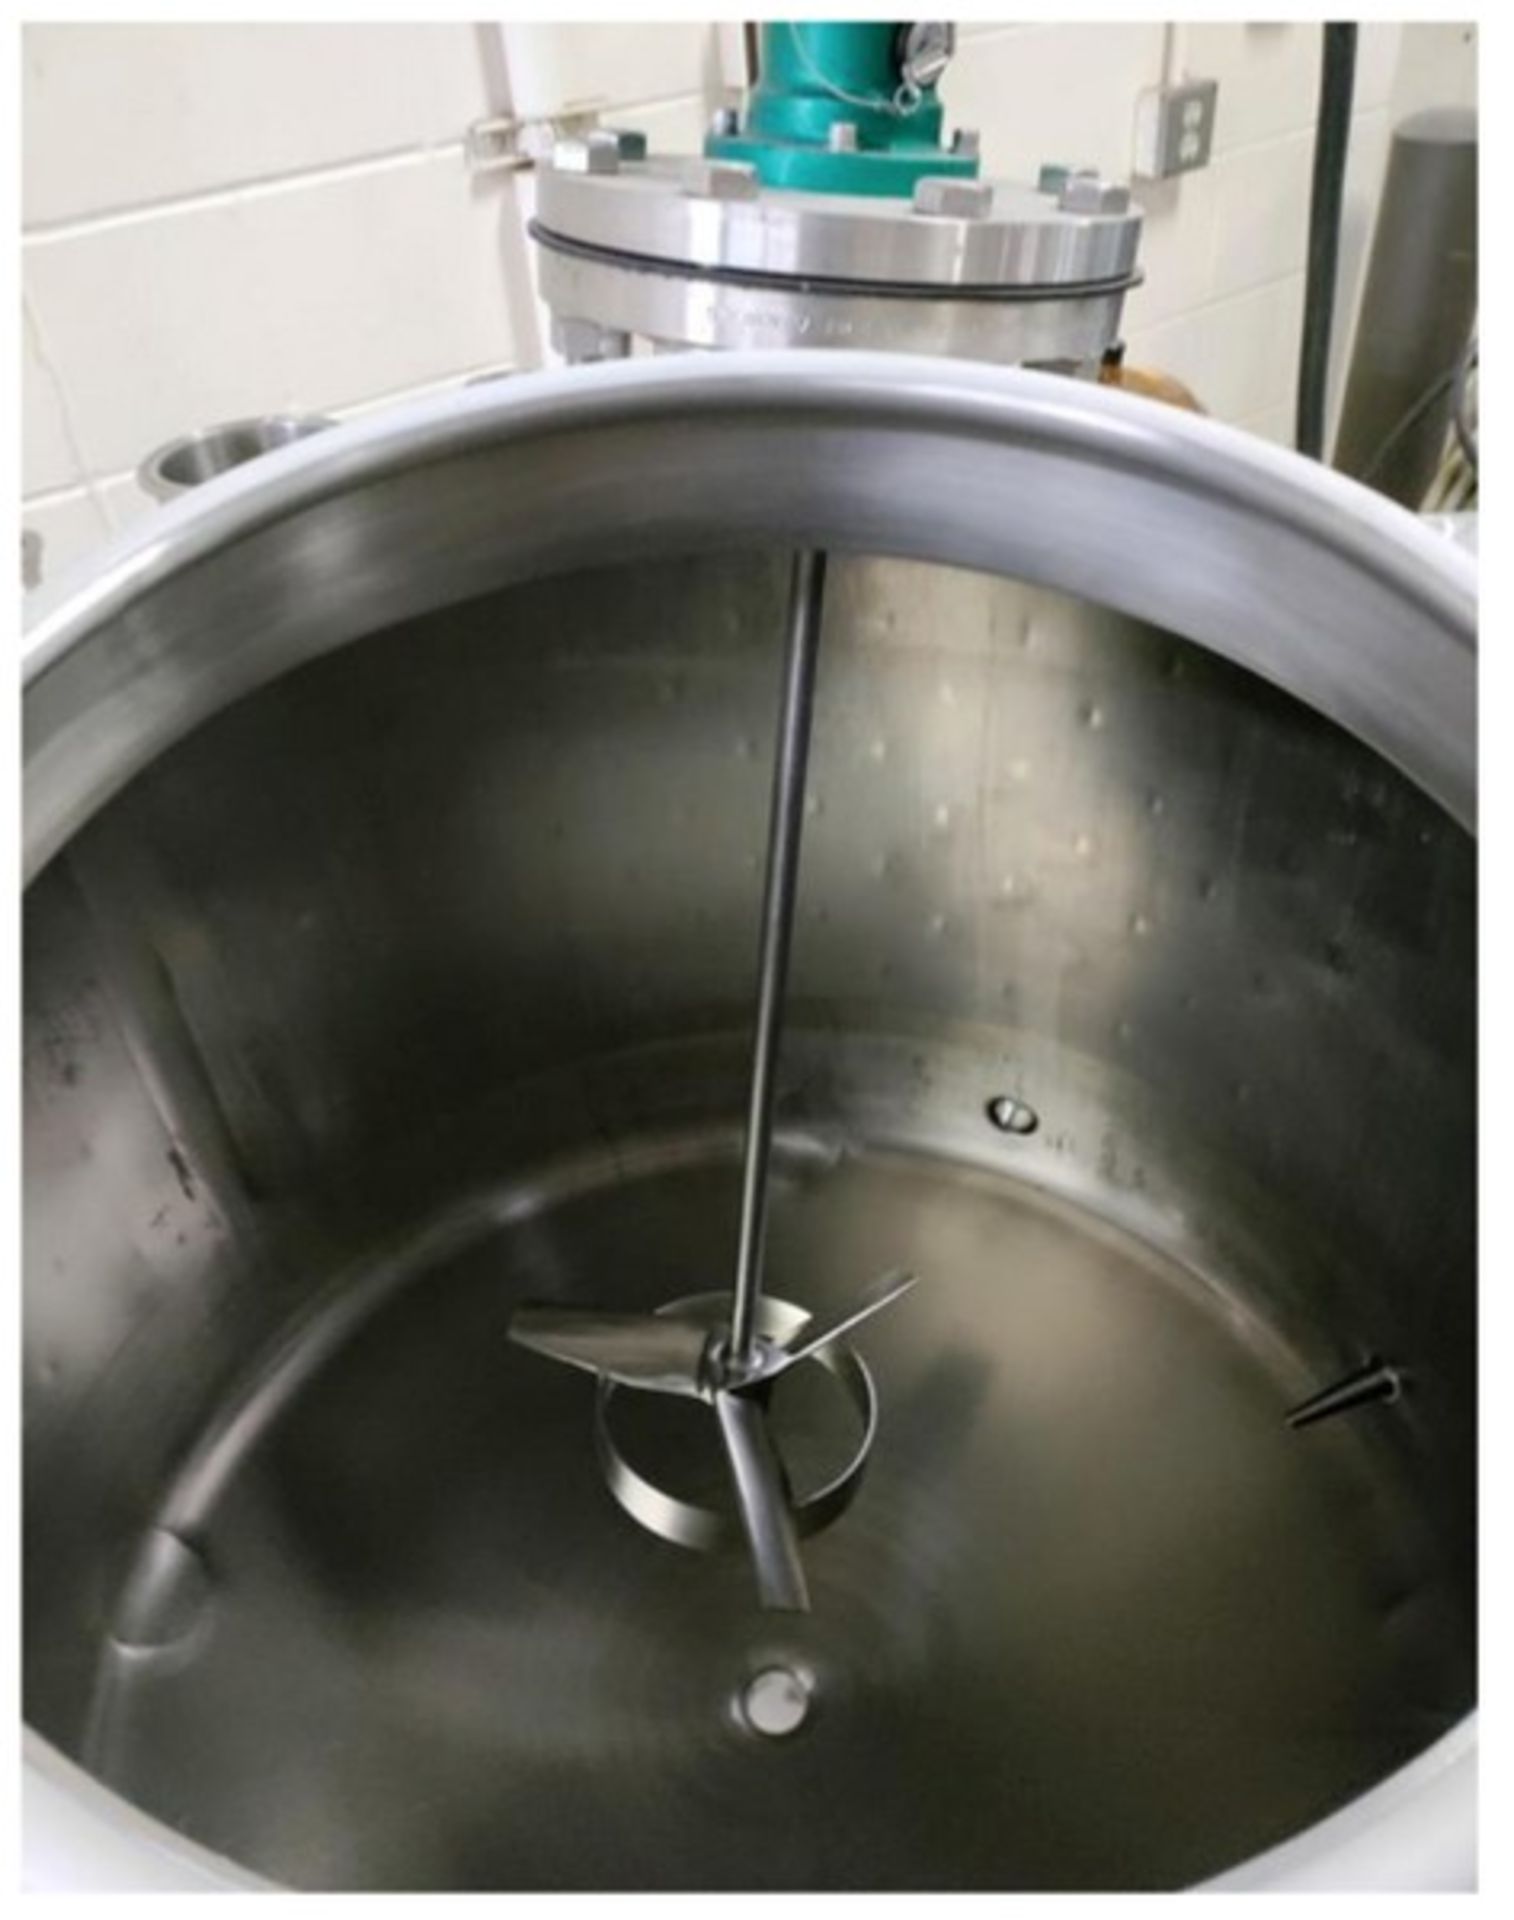 DCI 150 Gal. S/S Mixing Kettle, with 55 PSI Steam Jacket, with Lightnin Mixer, Mounted on Portable - Image 2 of 6